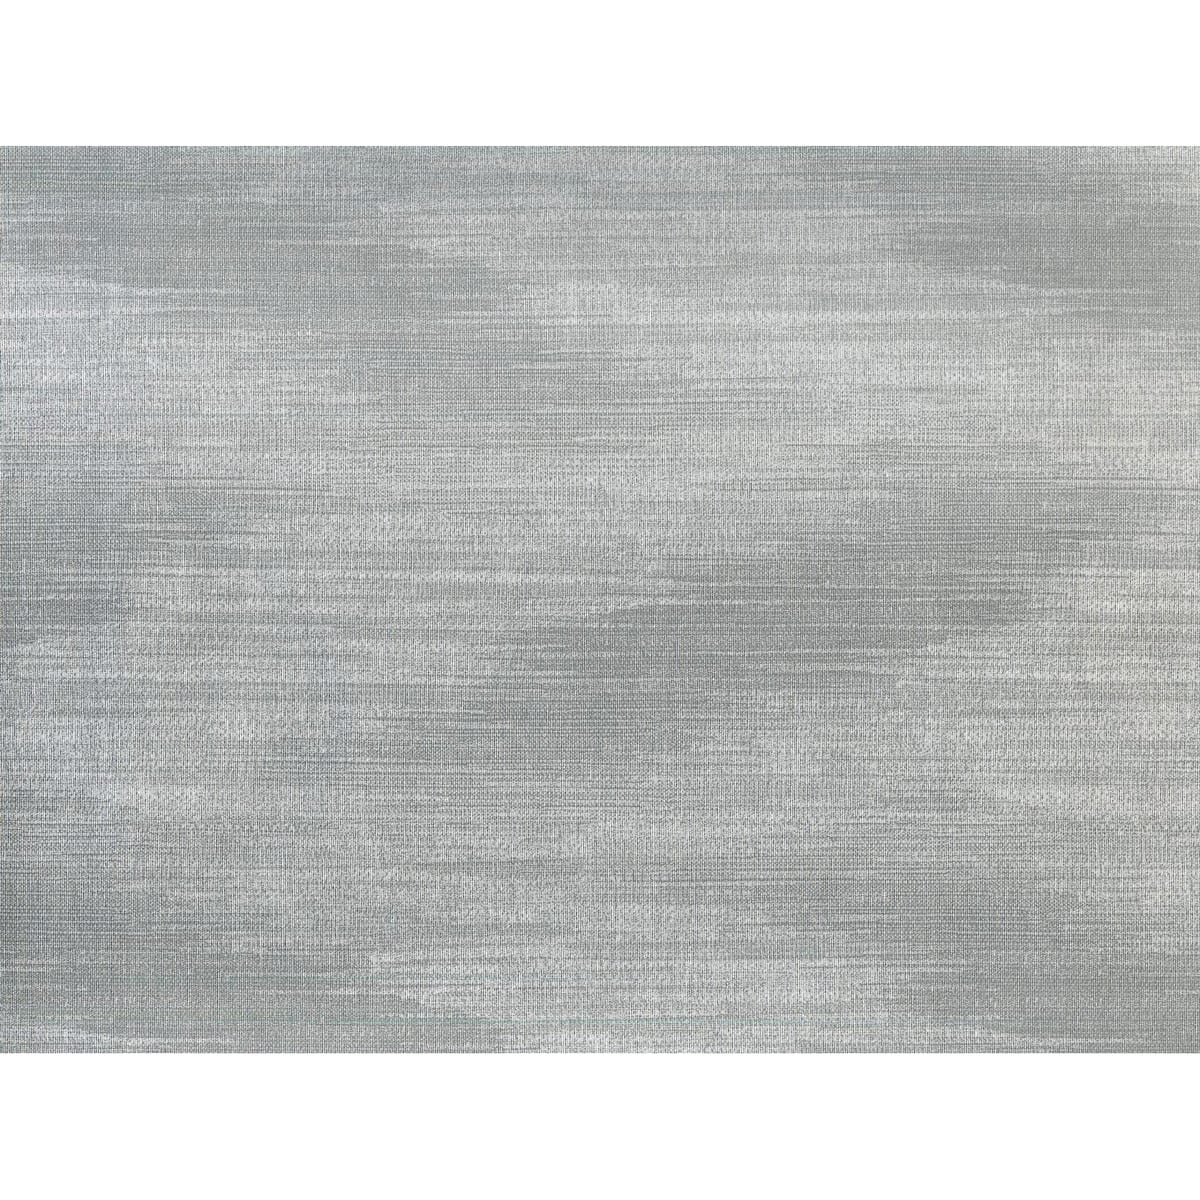 STAIN-PROOF TABLECLOTH GREY 140X175 CM RESINATED COTTON